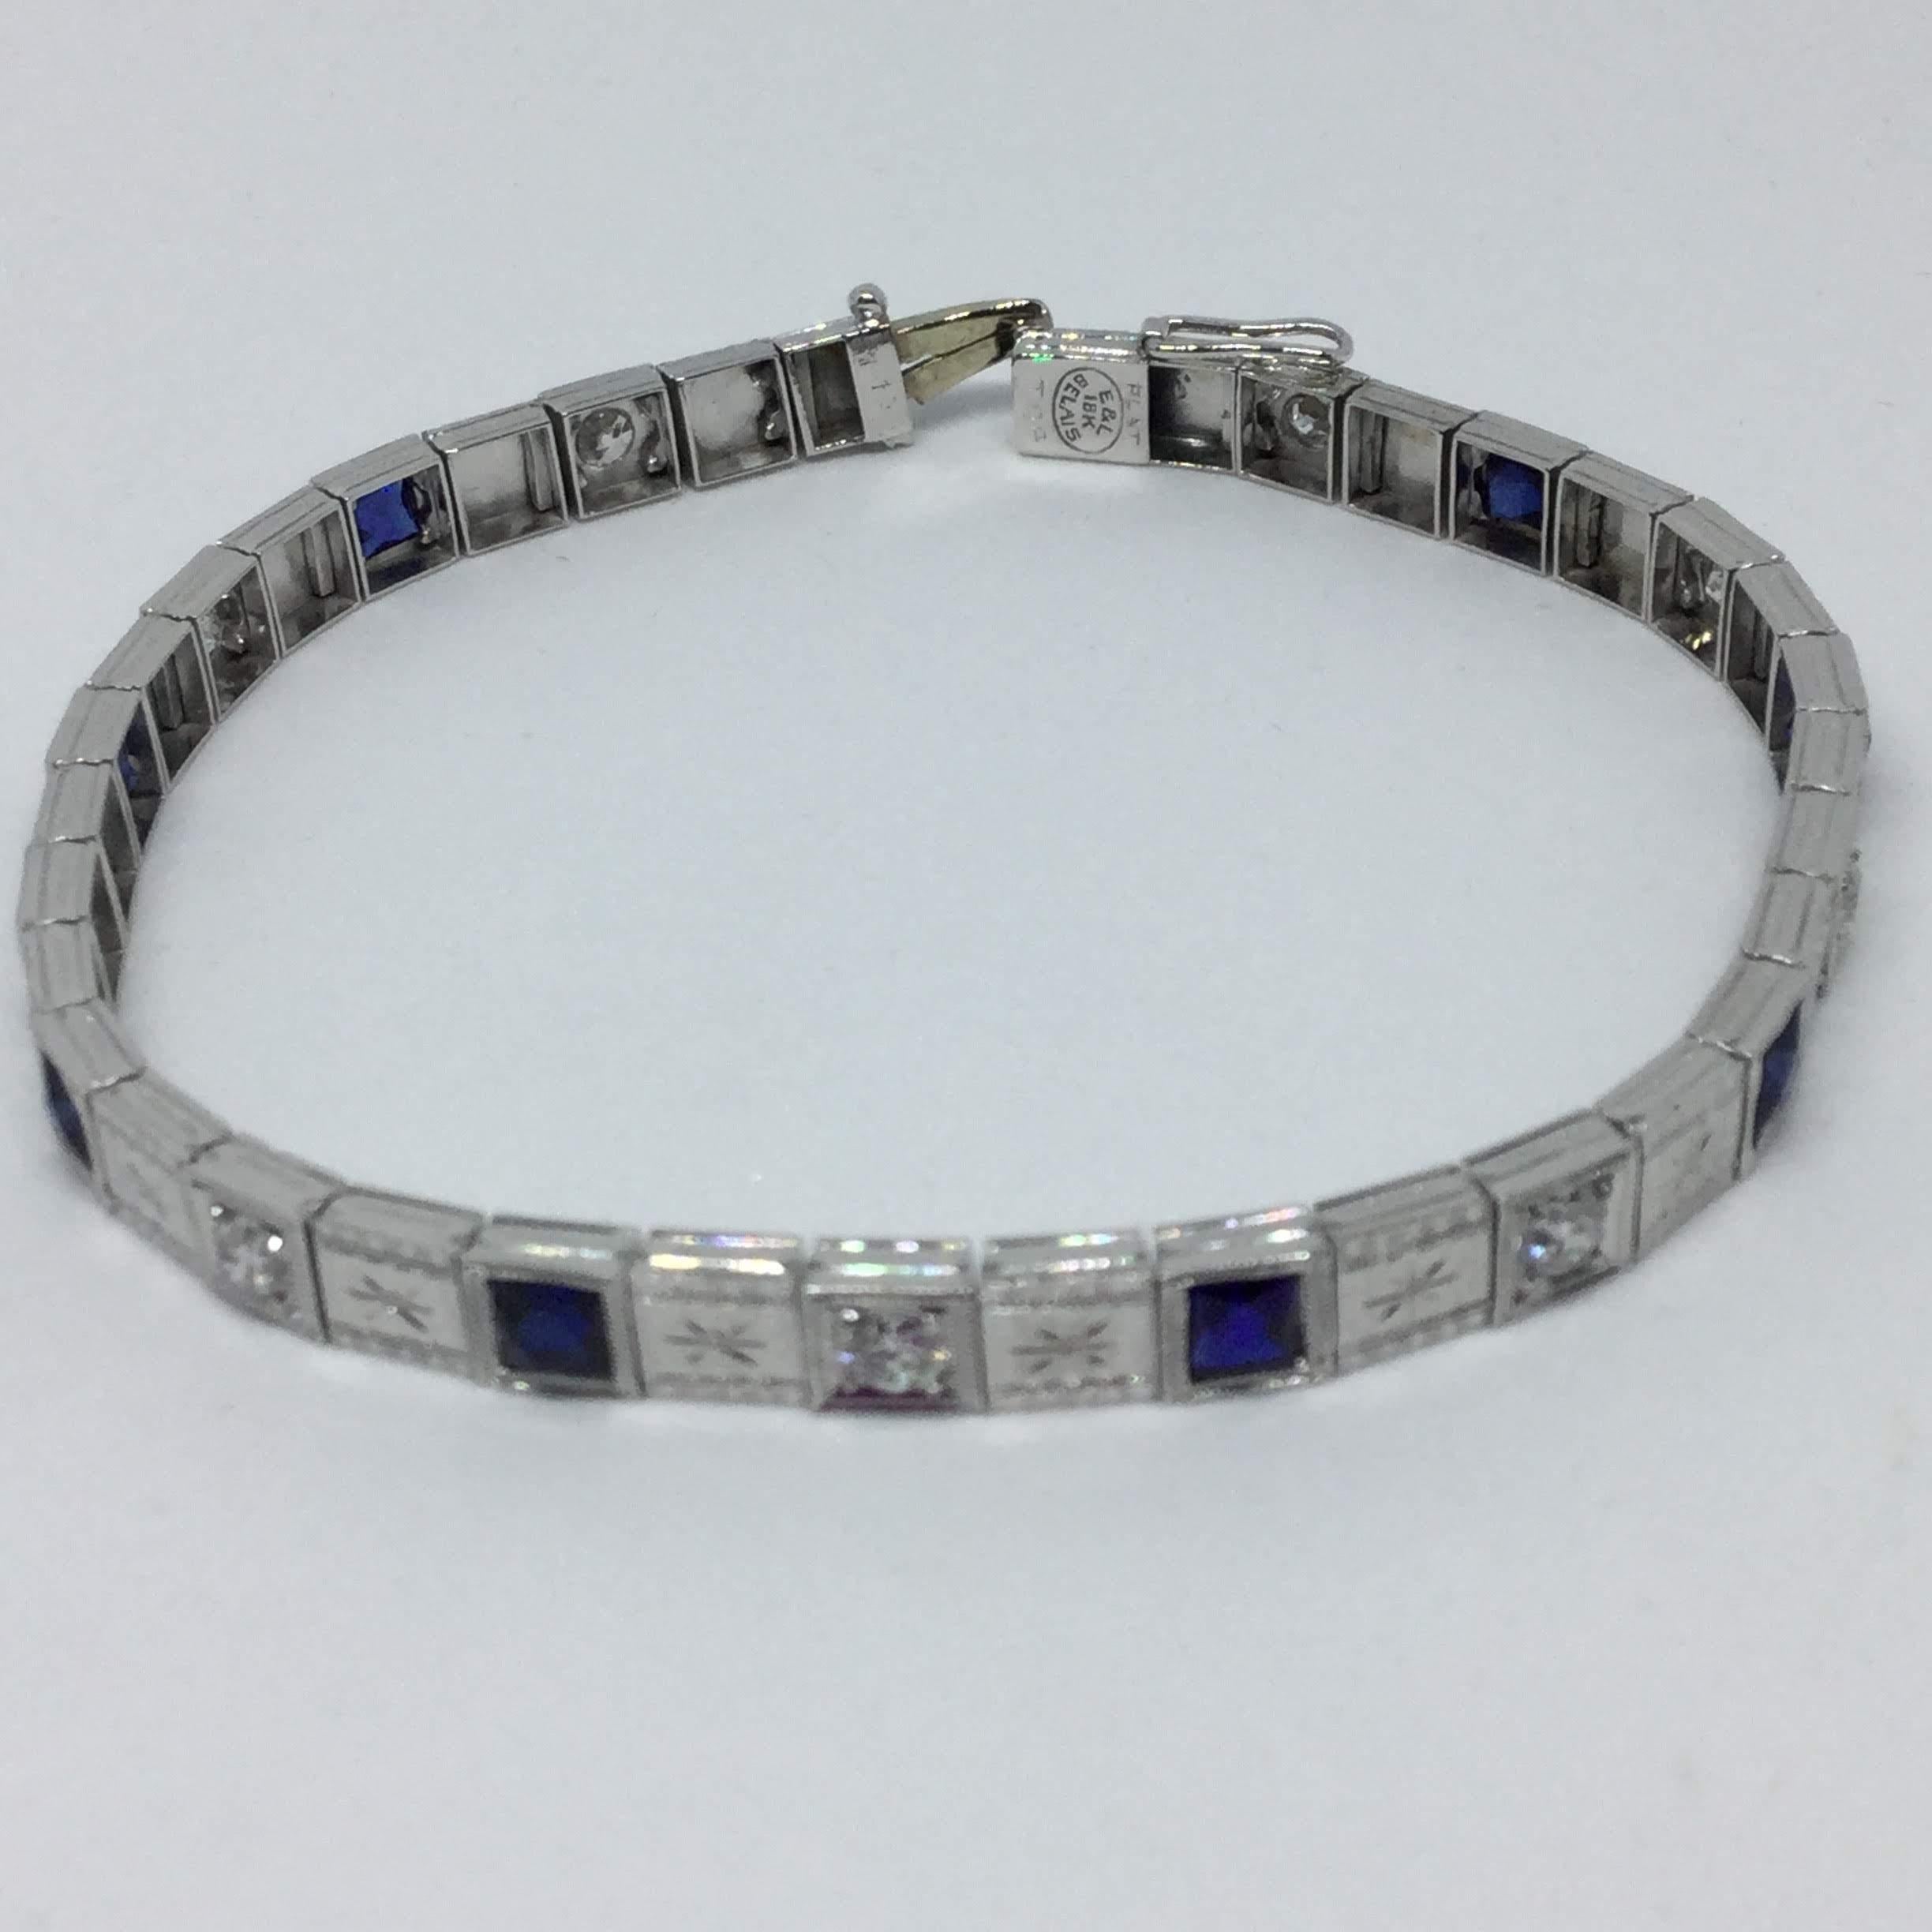 Platinum and 18K white gold sapphire and diamond bracelet.  The bracelet contains 8 square faceted cut sapphires. The sapphires weigh approx 1.25 ctw. The bracelet also contains 9 round brilliant cut diamonds. The diamonds weigh approx 0.90 ctw. The